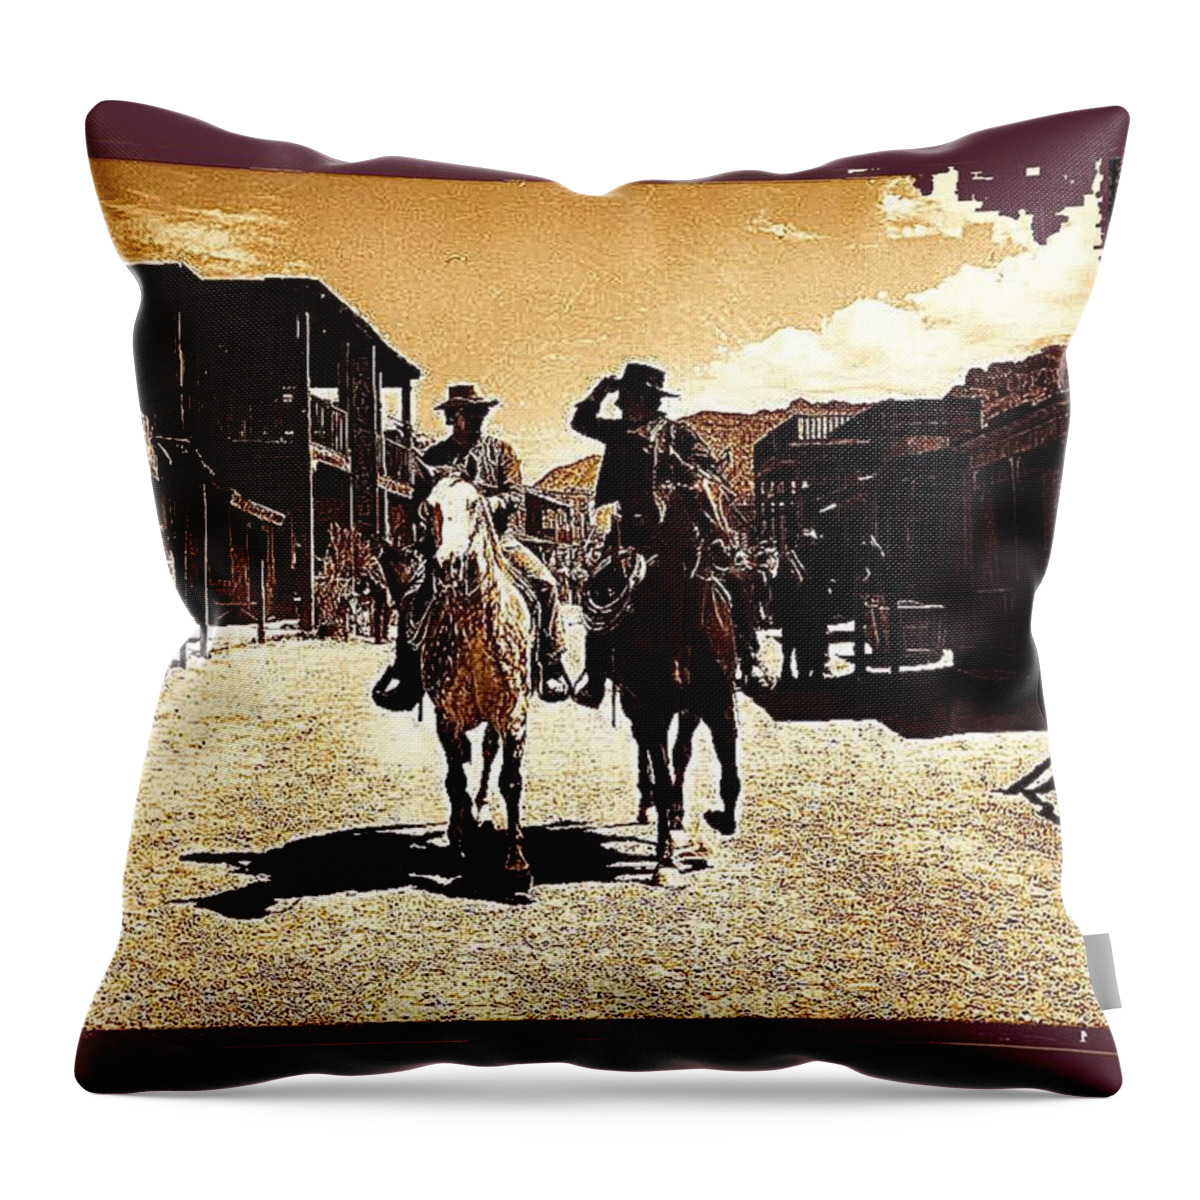 Film Homage Mark Slade Cameron Mitchell Riding Horses The High Chaparral Old Tucson Arizona Throw Pillow featuring the photograph Film Homage Mark Slade Cameron Mitchell Riding Horses The High Chaparral Old Tucson AZ 1967-2008 by David Lee Guss